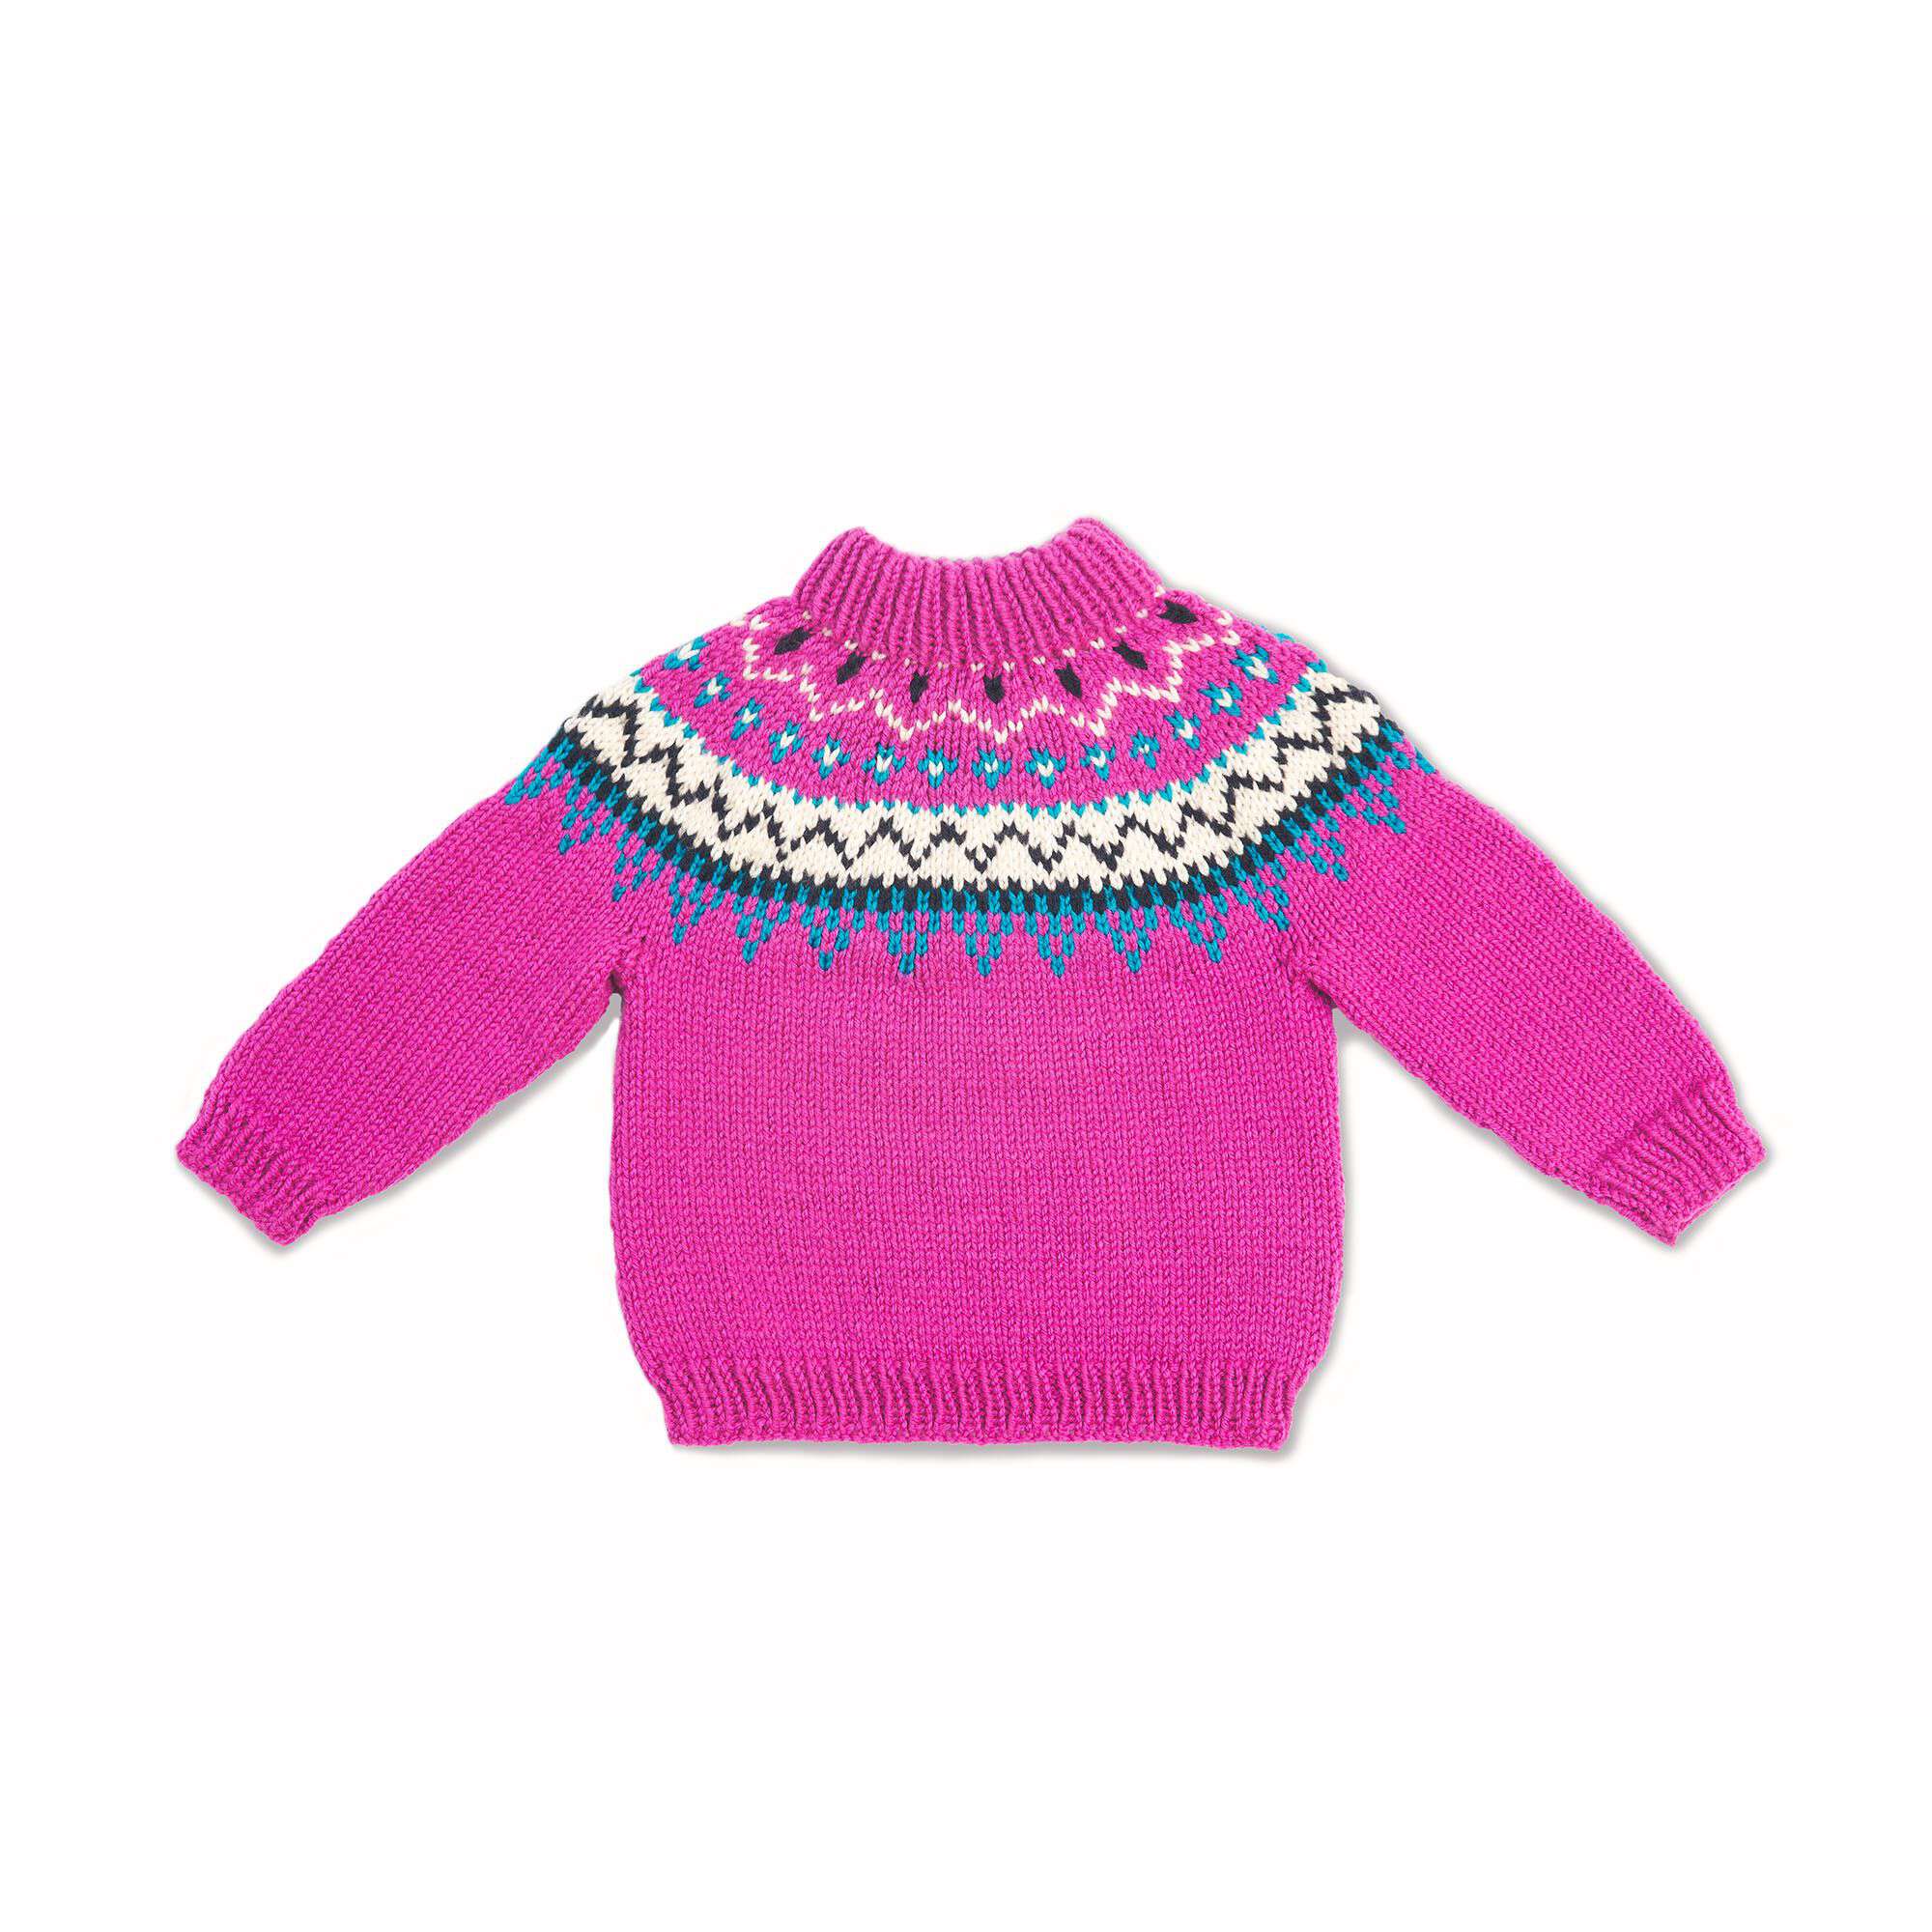 How to Knit for Kids - The knit stitch 